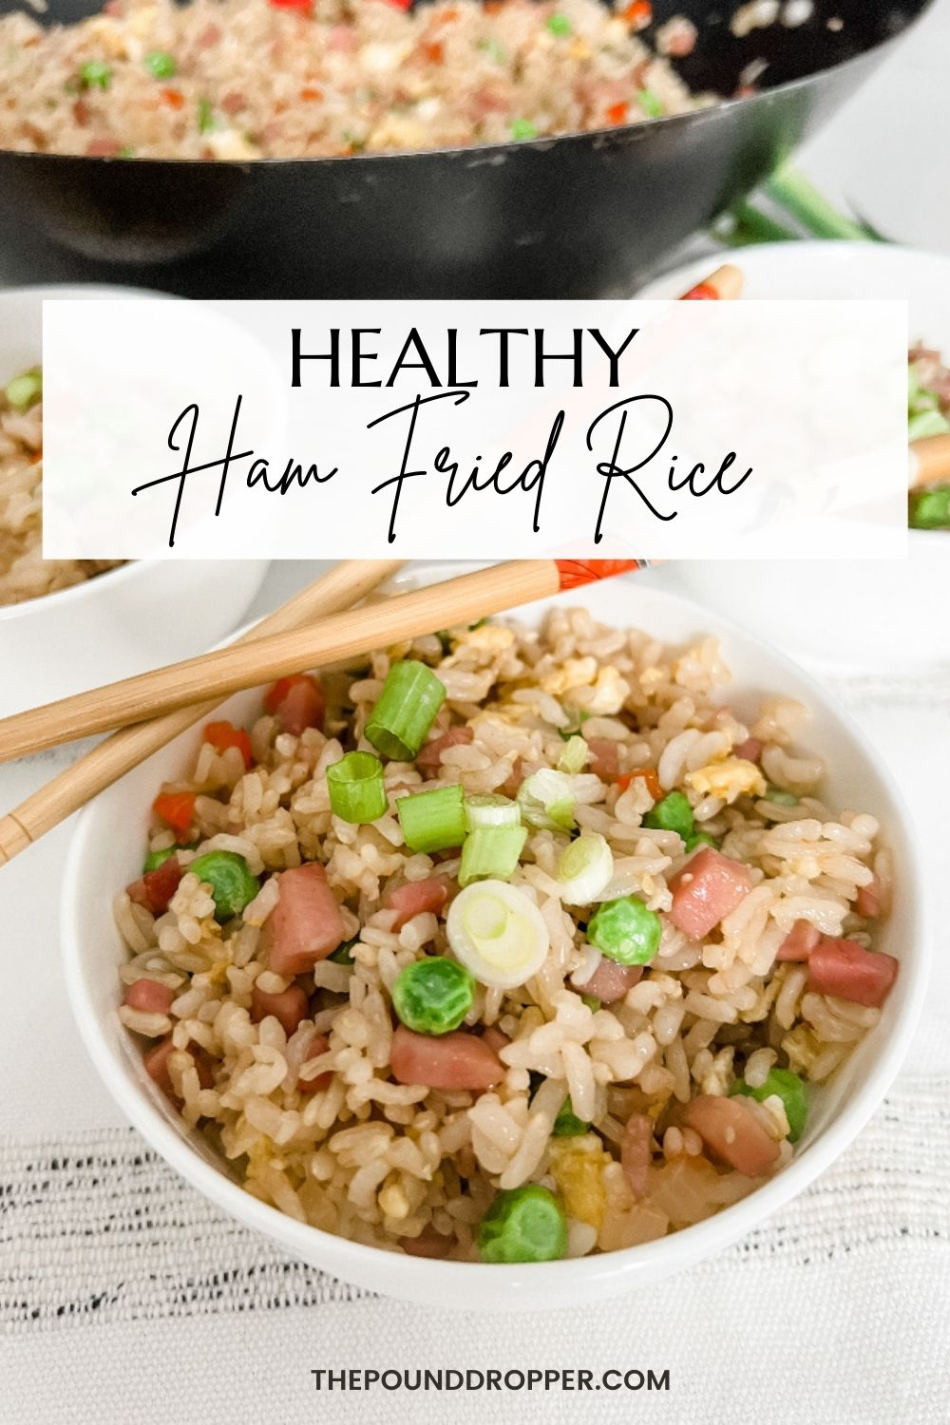 This Healthy Ham Fried Rice makes for fantastic family friendly side dish or meal-made with simple ingredients like diced ham, fresh and frozen veggies, eggs, and leftover rice! This is simple to make and can be made in under 30 minutes! via @pounddropper